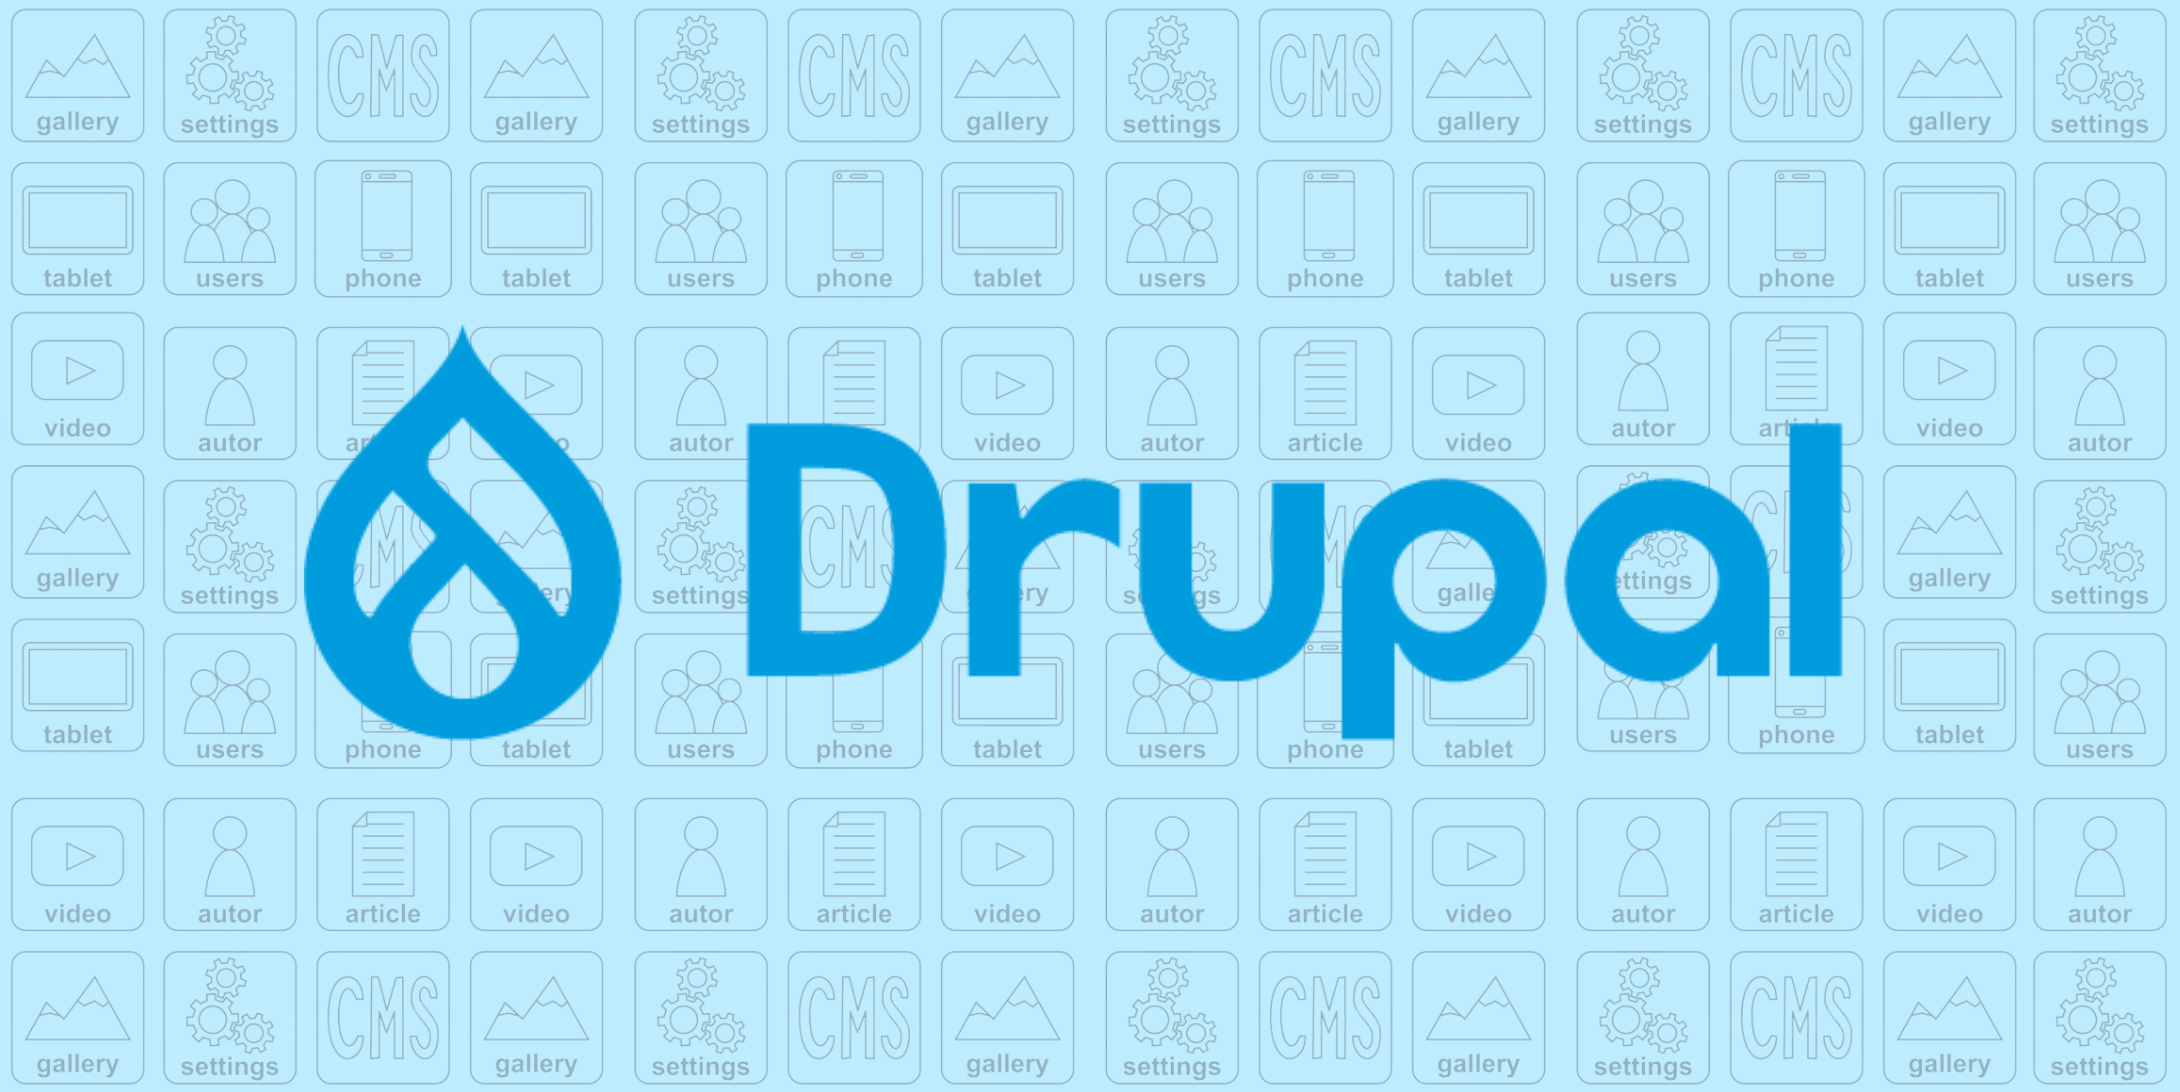 An image displaying the Drupal logo and text, accompanied by small icons in the background